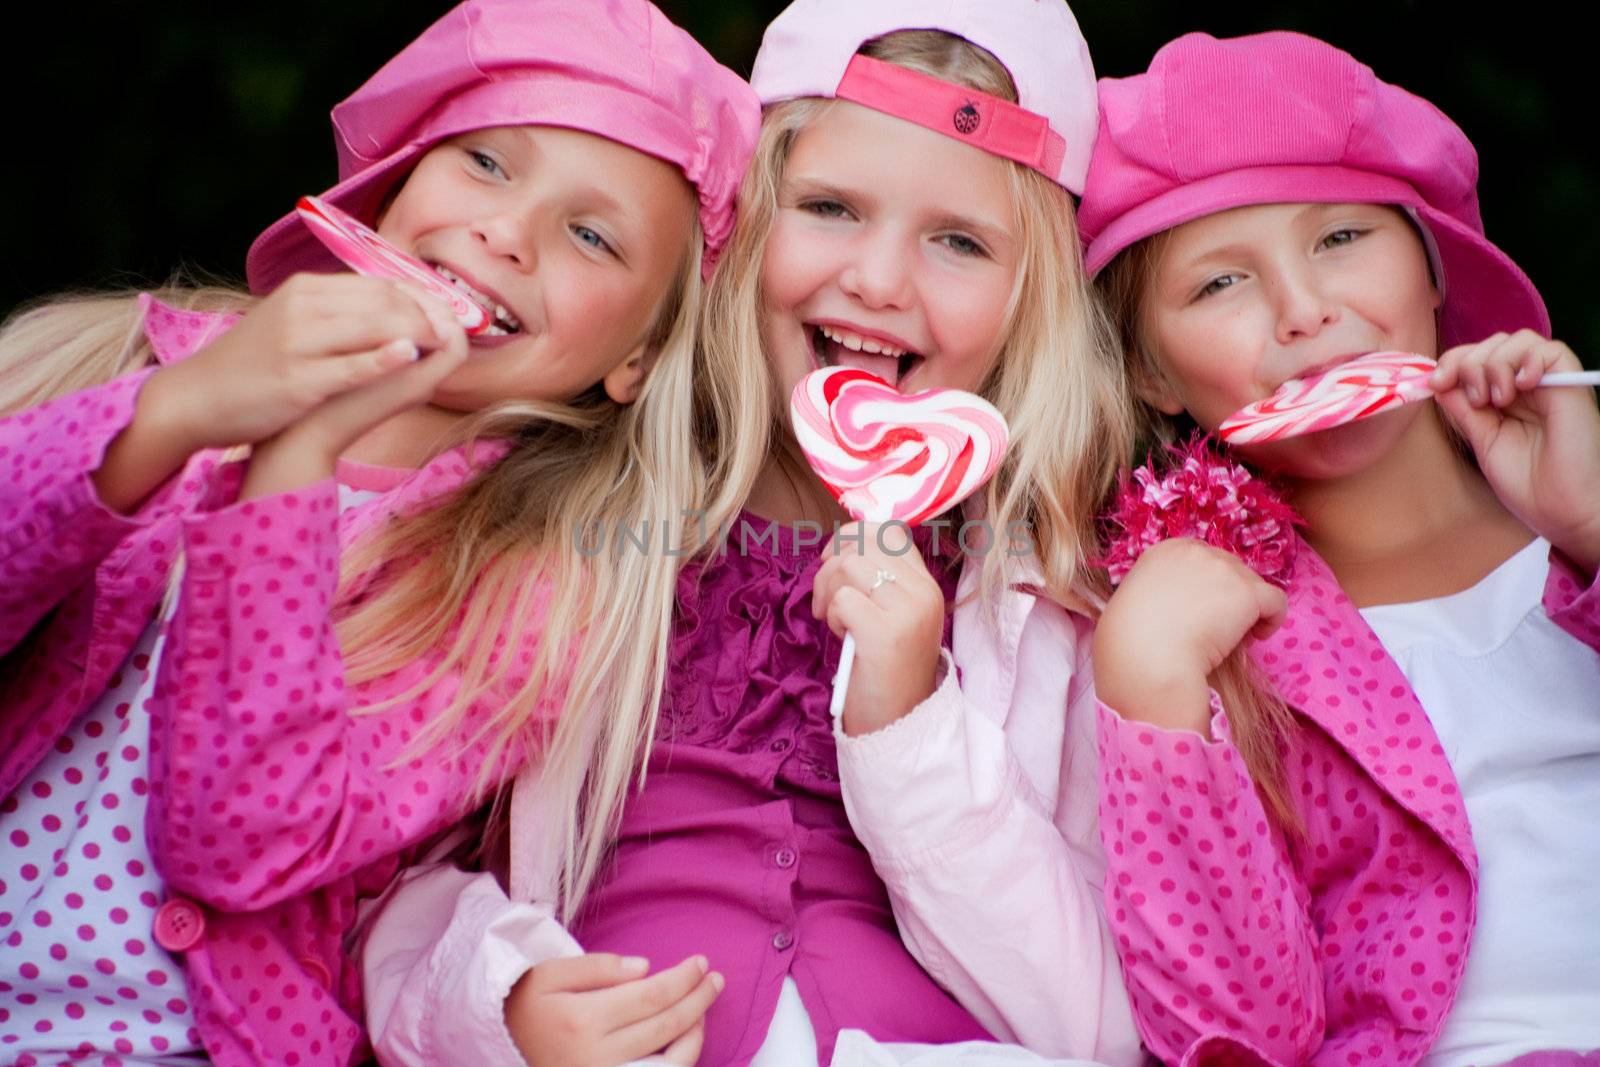 Happy children having pink clothes and a lollipop